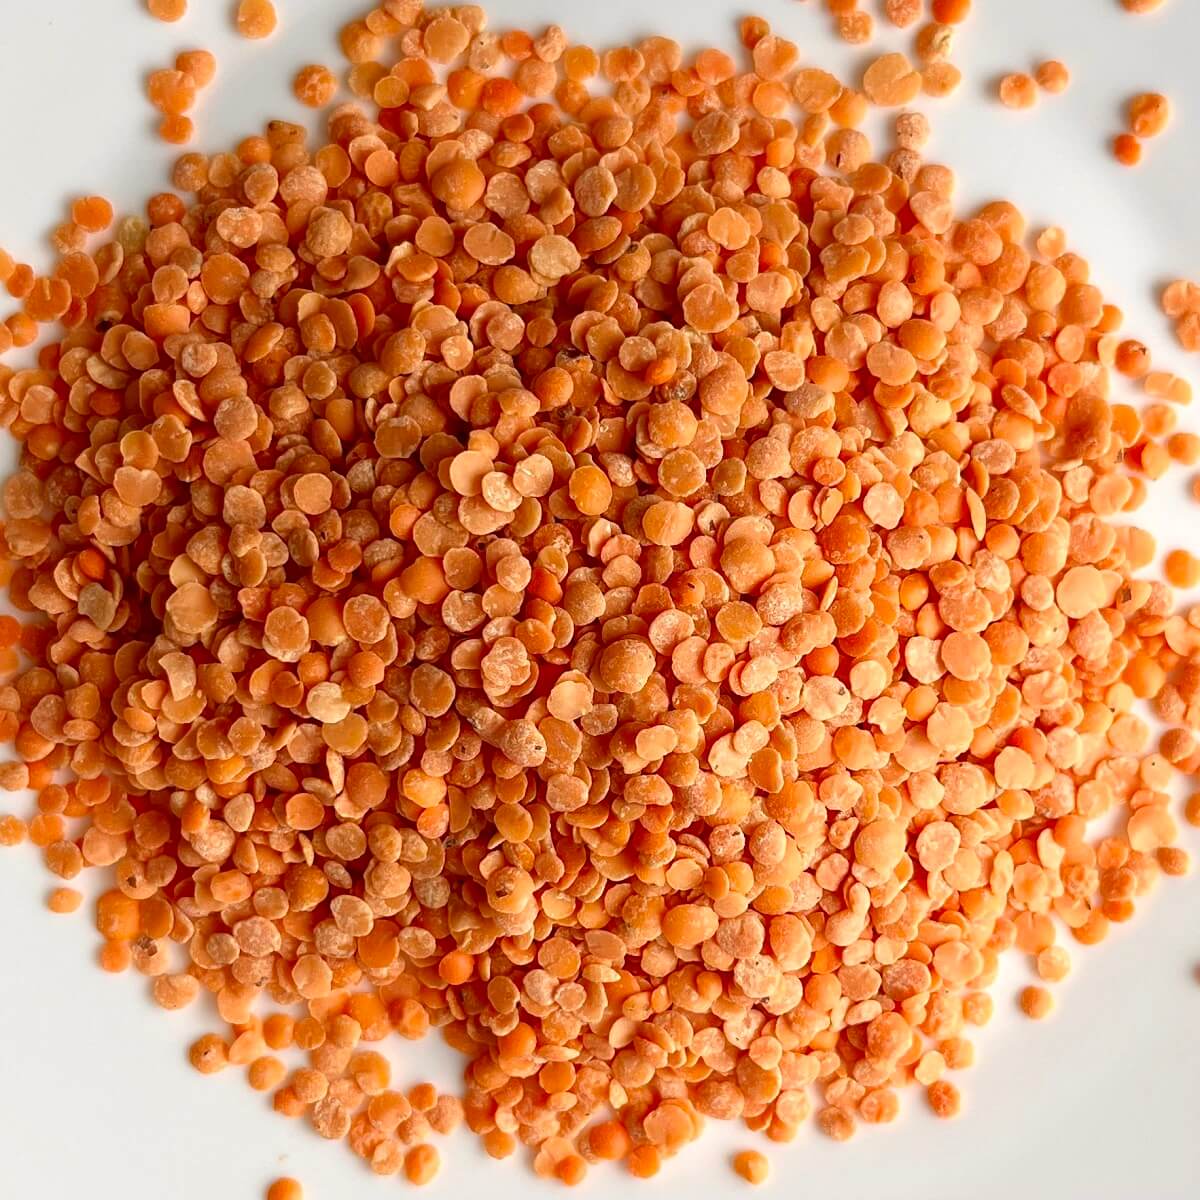 A pile of dried red lentils on a white plate.